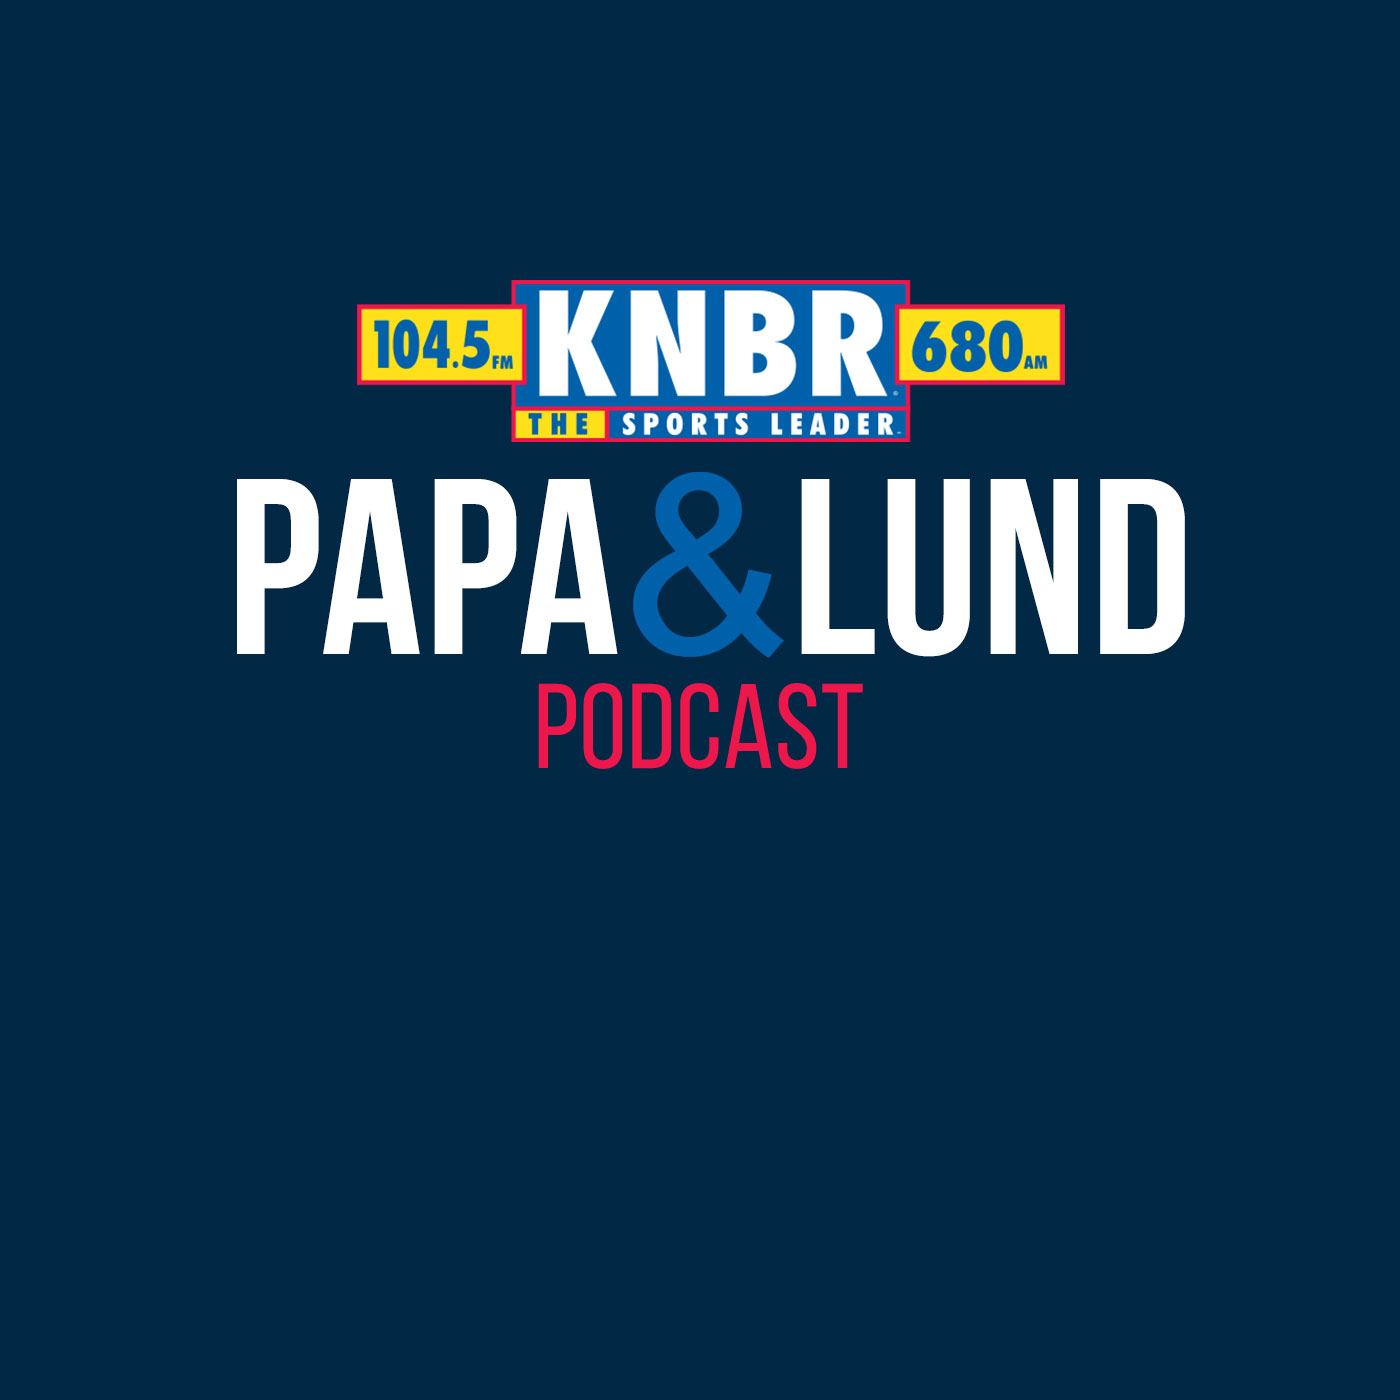 6-10 Marcus Thompson joins Papa & Lund to discuss the market that is developing for Klay Thompson and what are the chances he returns to the Warriors next season